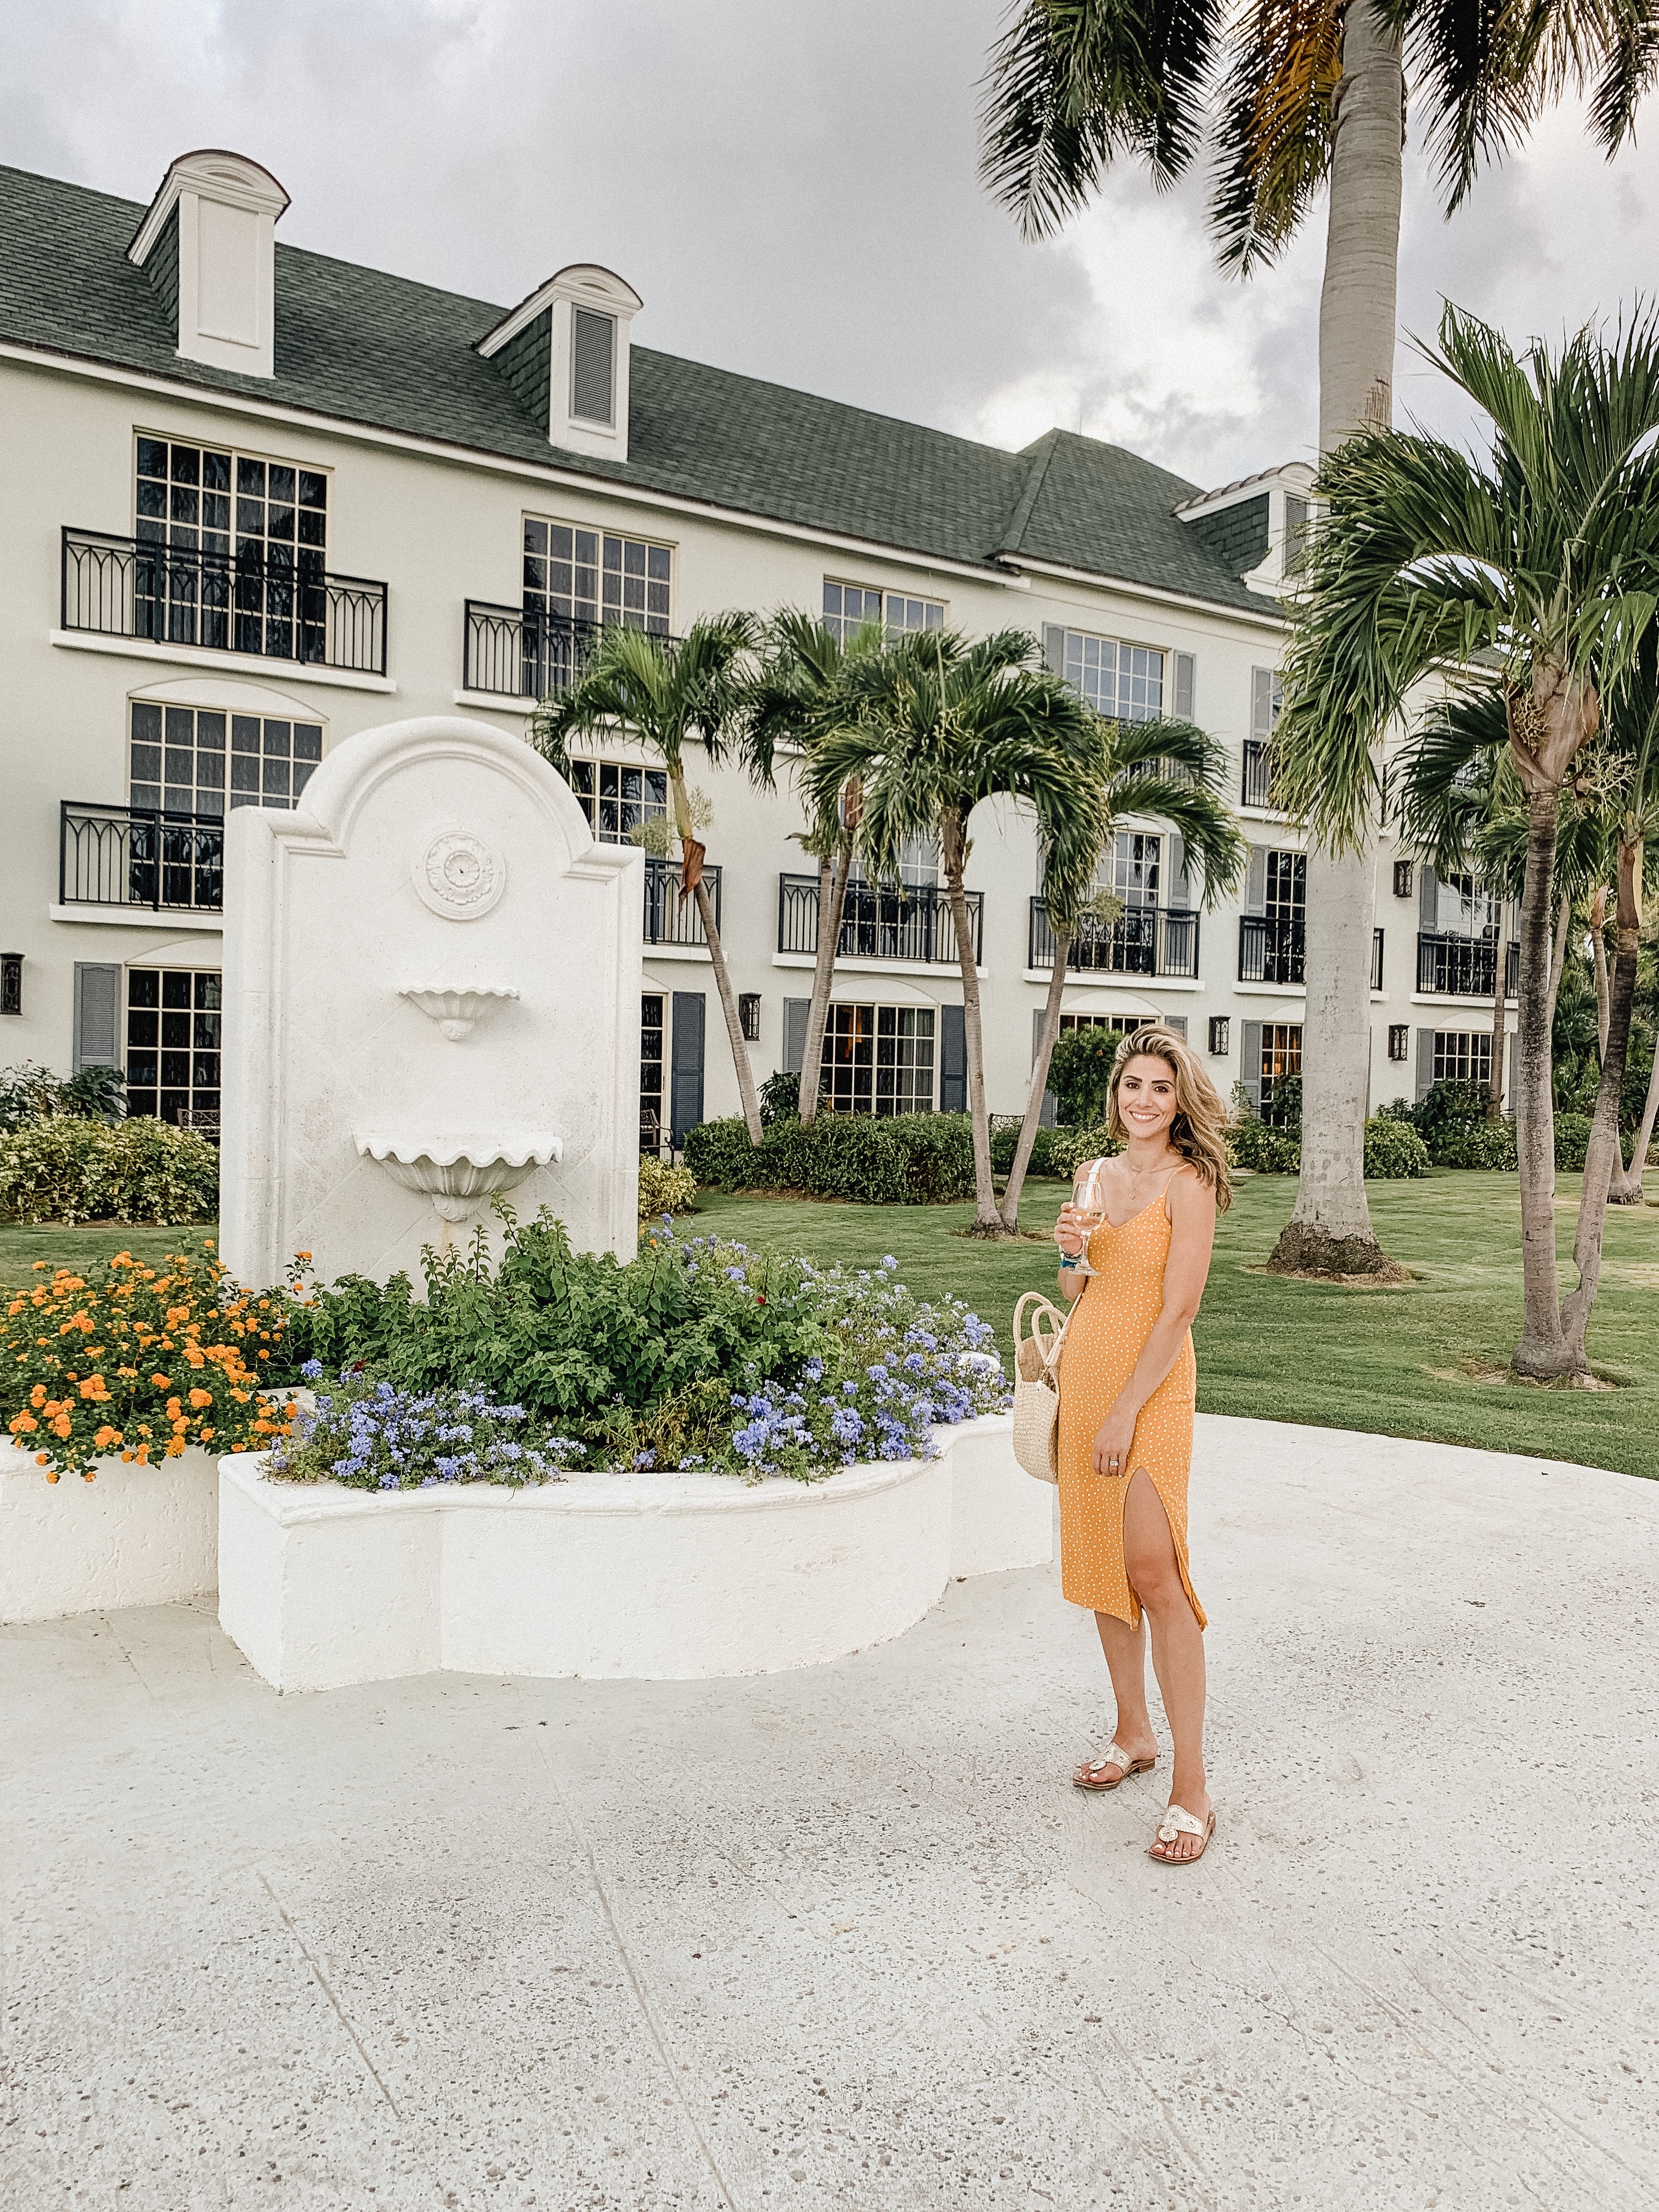 Connecticut life and style blogger Lauren McBride shares a Turks & Caicos outfit roundup, including dresses, coverups, and bathing suits.